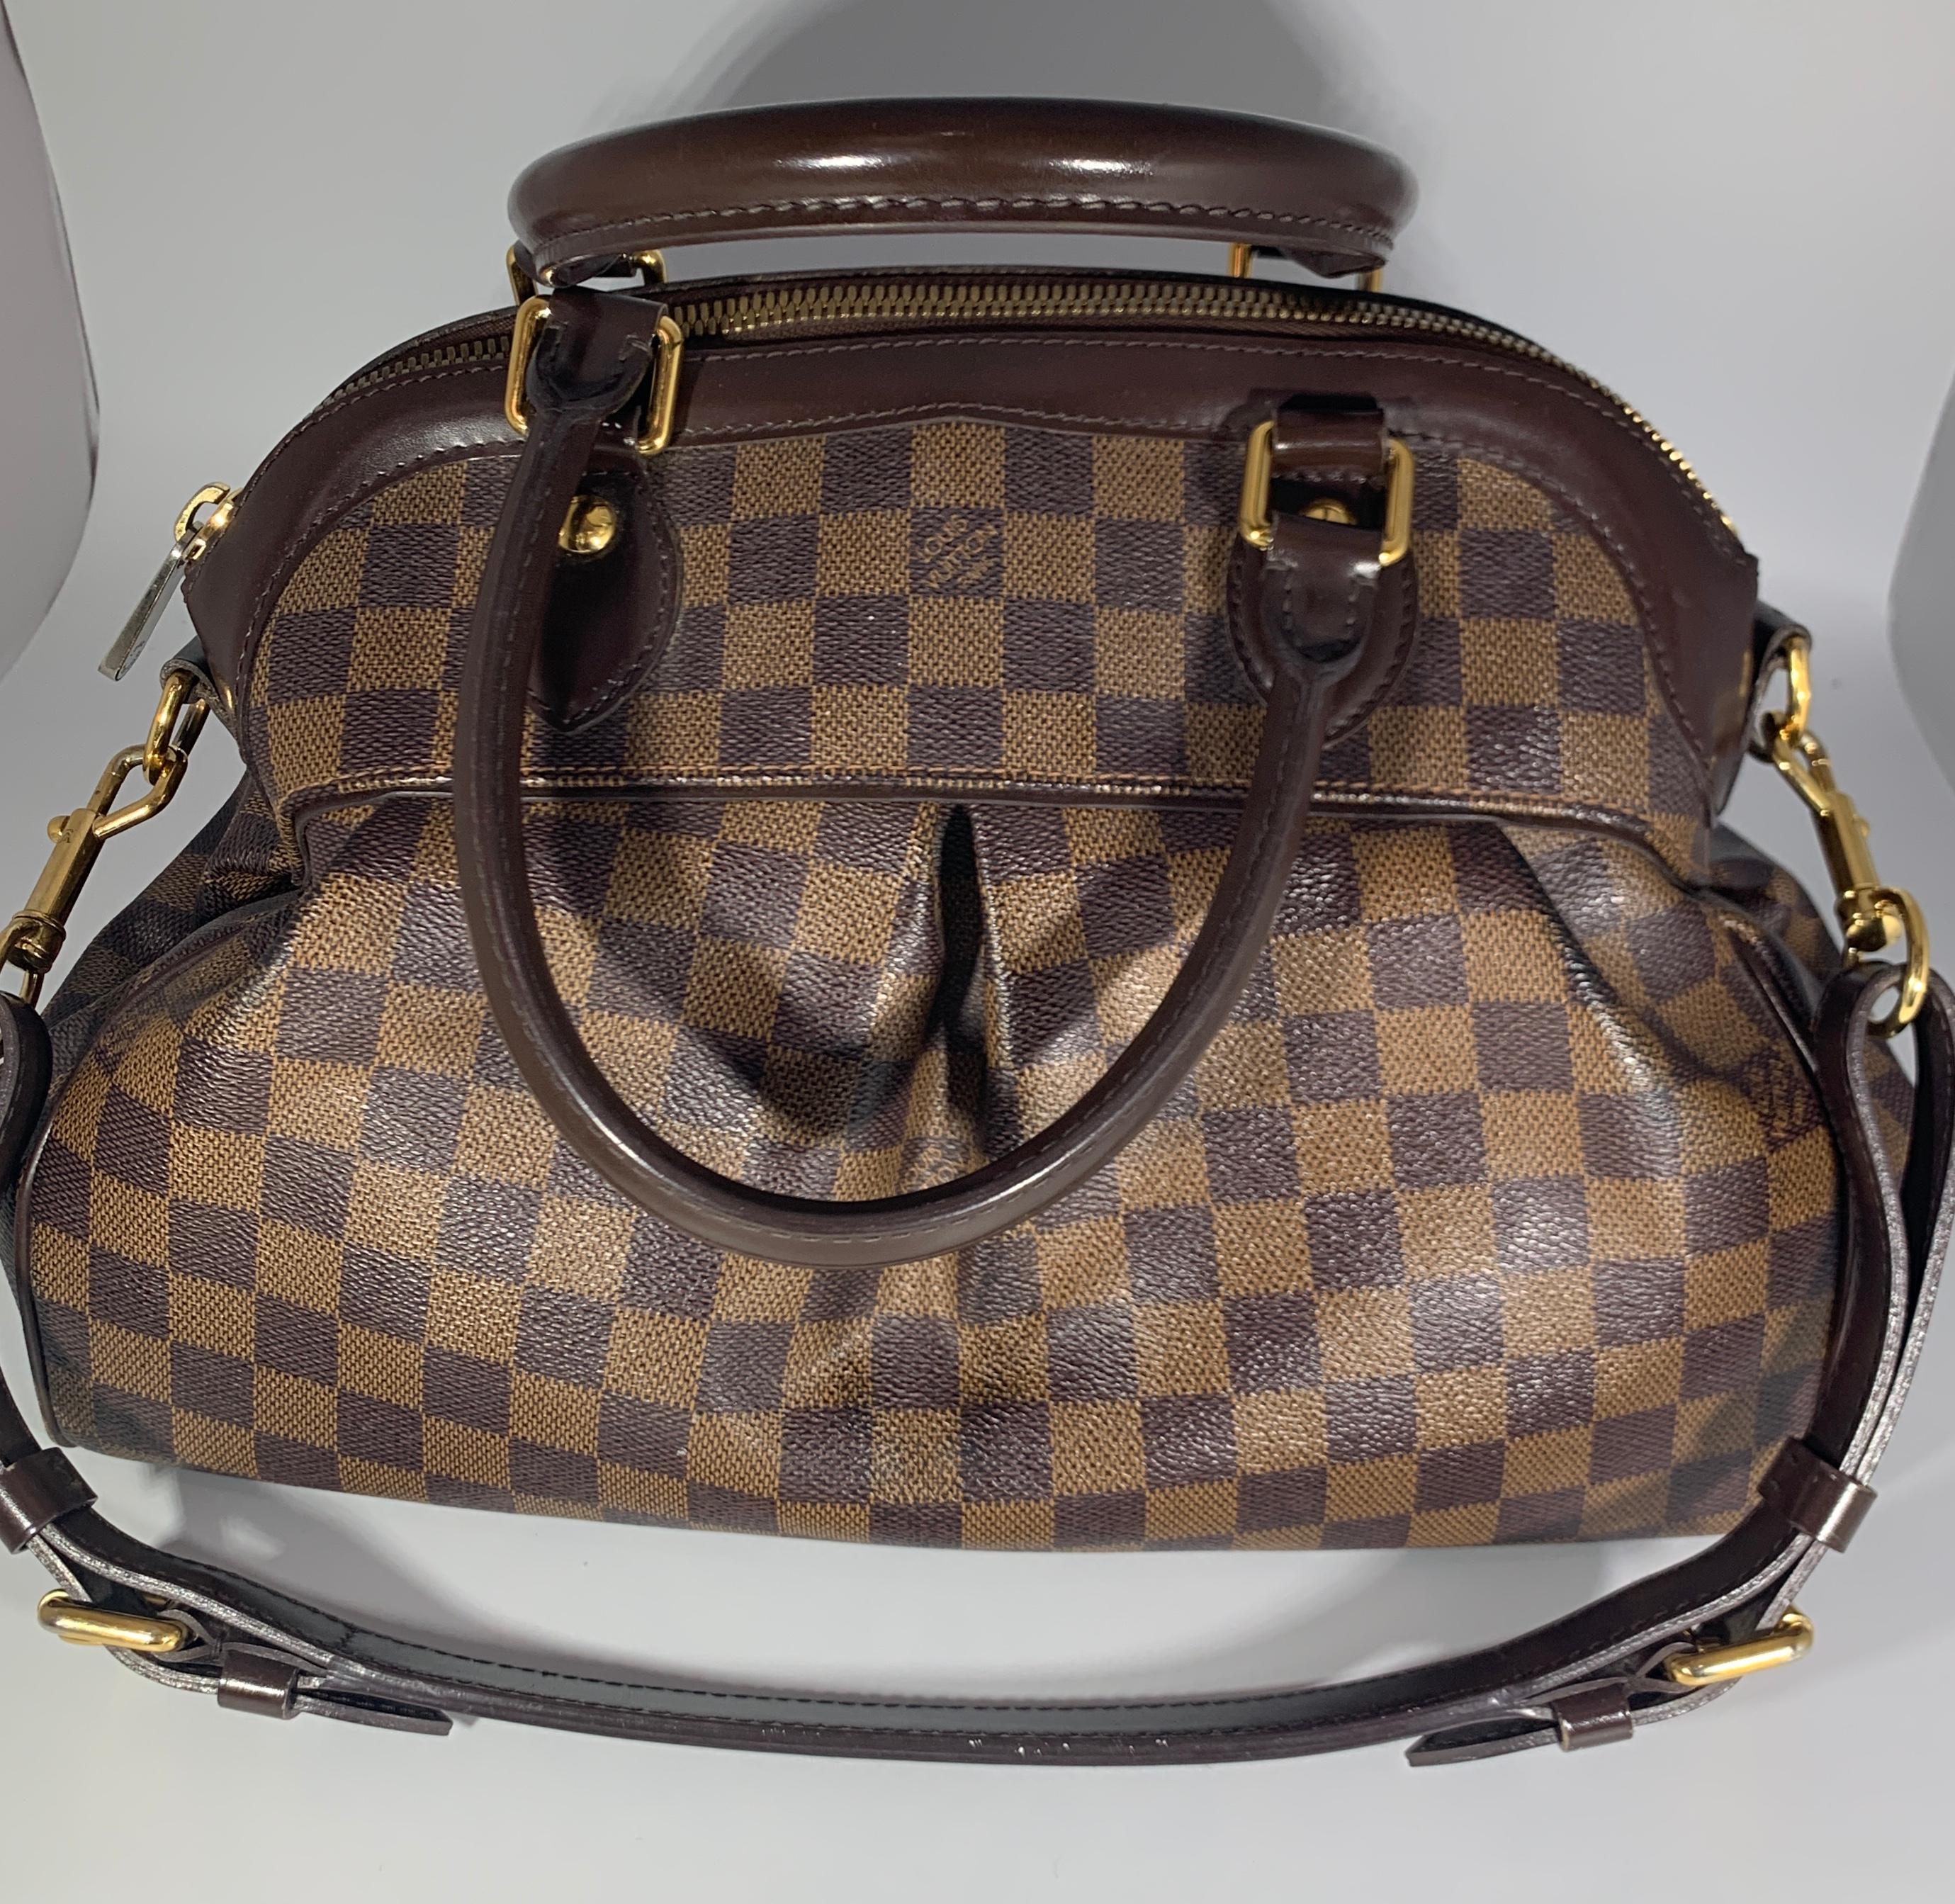 This is an authentic LOUIS VUITTON Trevi PM Bag. This beautiful satchel handbag is named after the entrancing Trevi Fountain in Rome, Italy. It's a beautifully designed petite handbag with a cinched detail on the front and sides. It features the